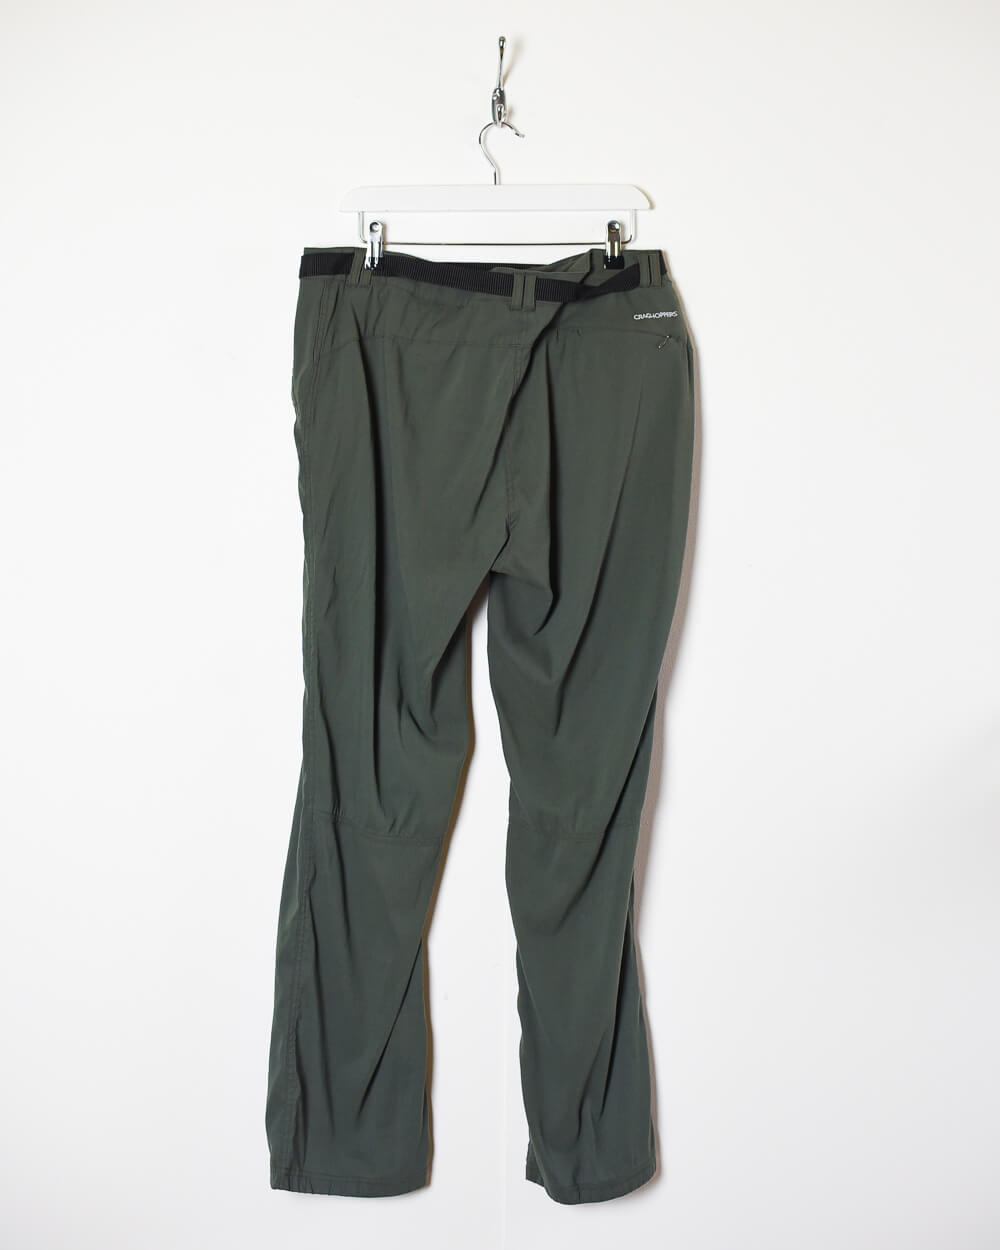 Green Craghoppers Women's Trousers - X-Large 